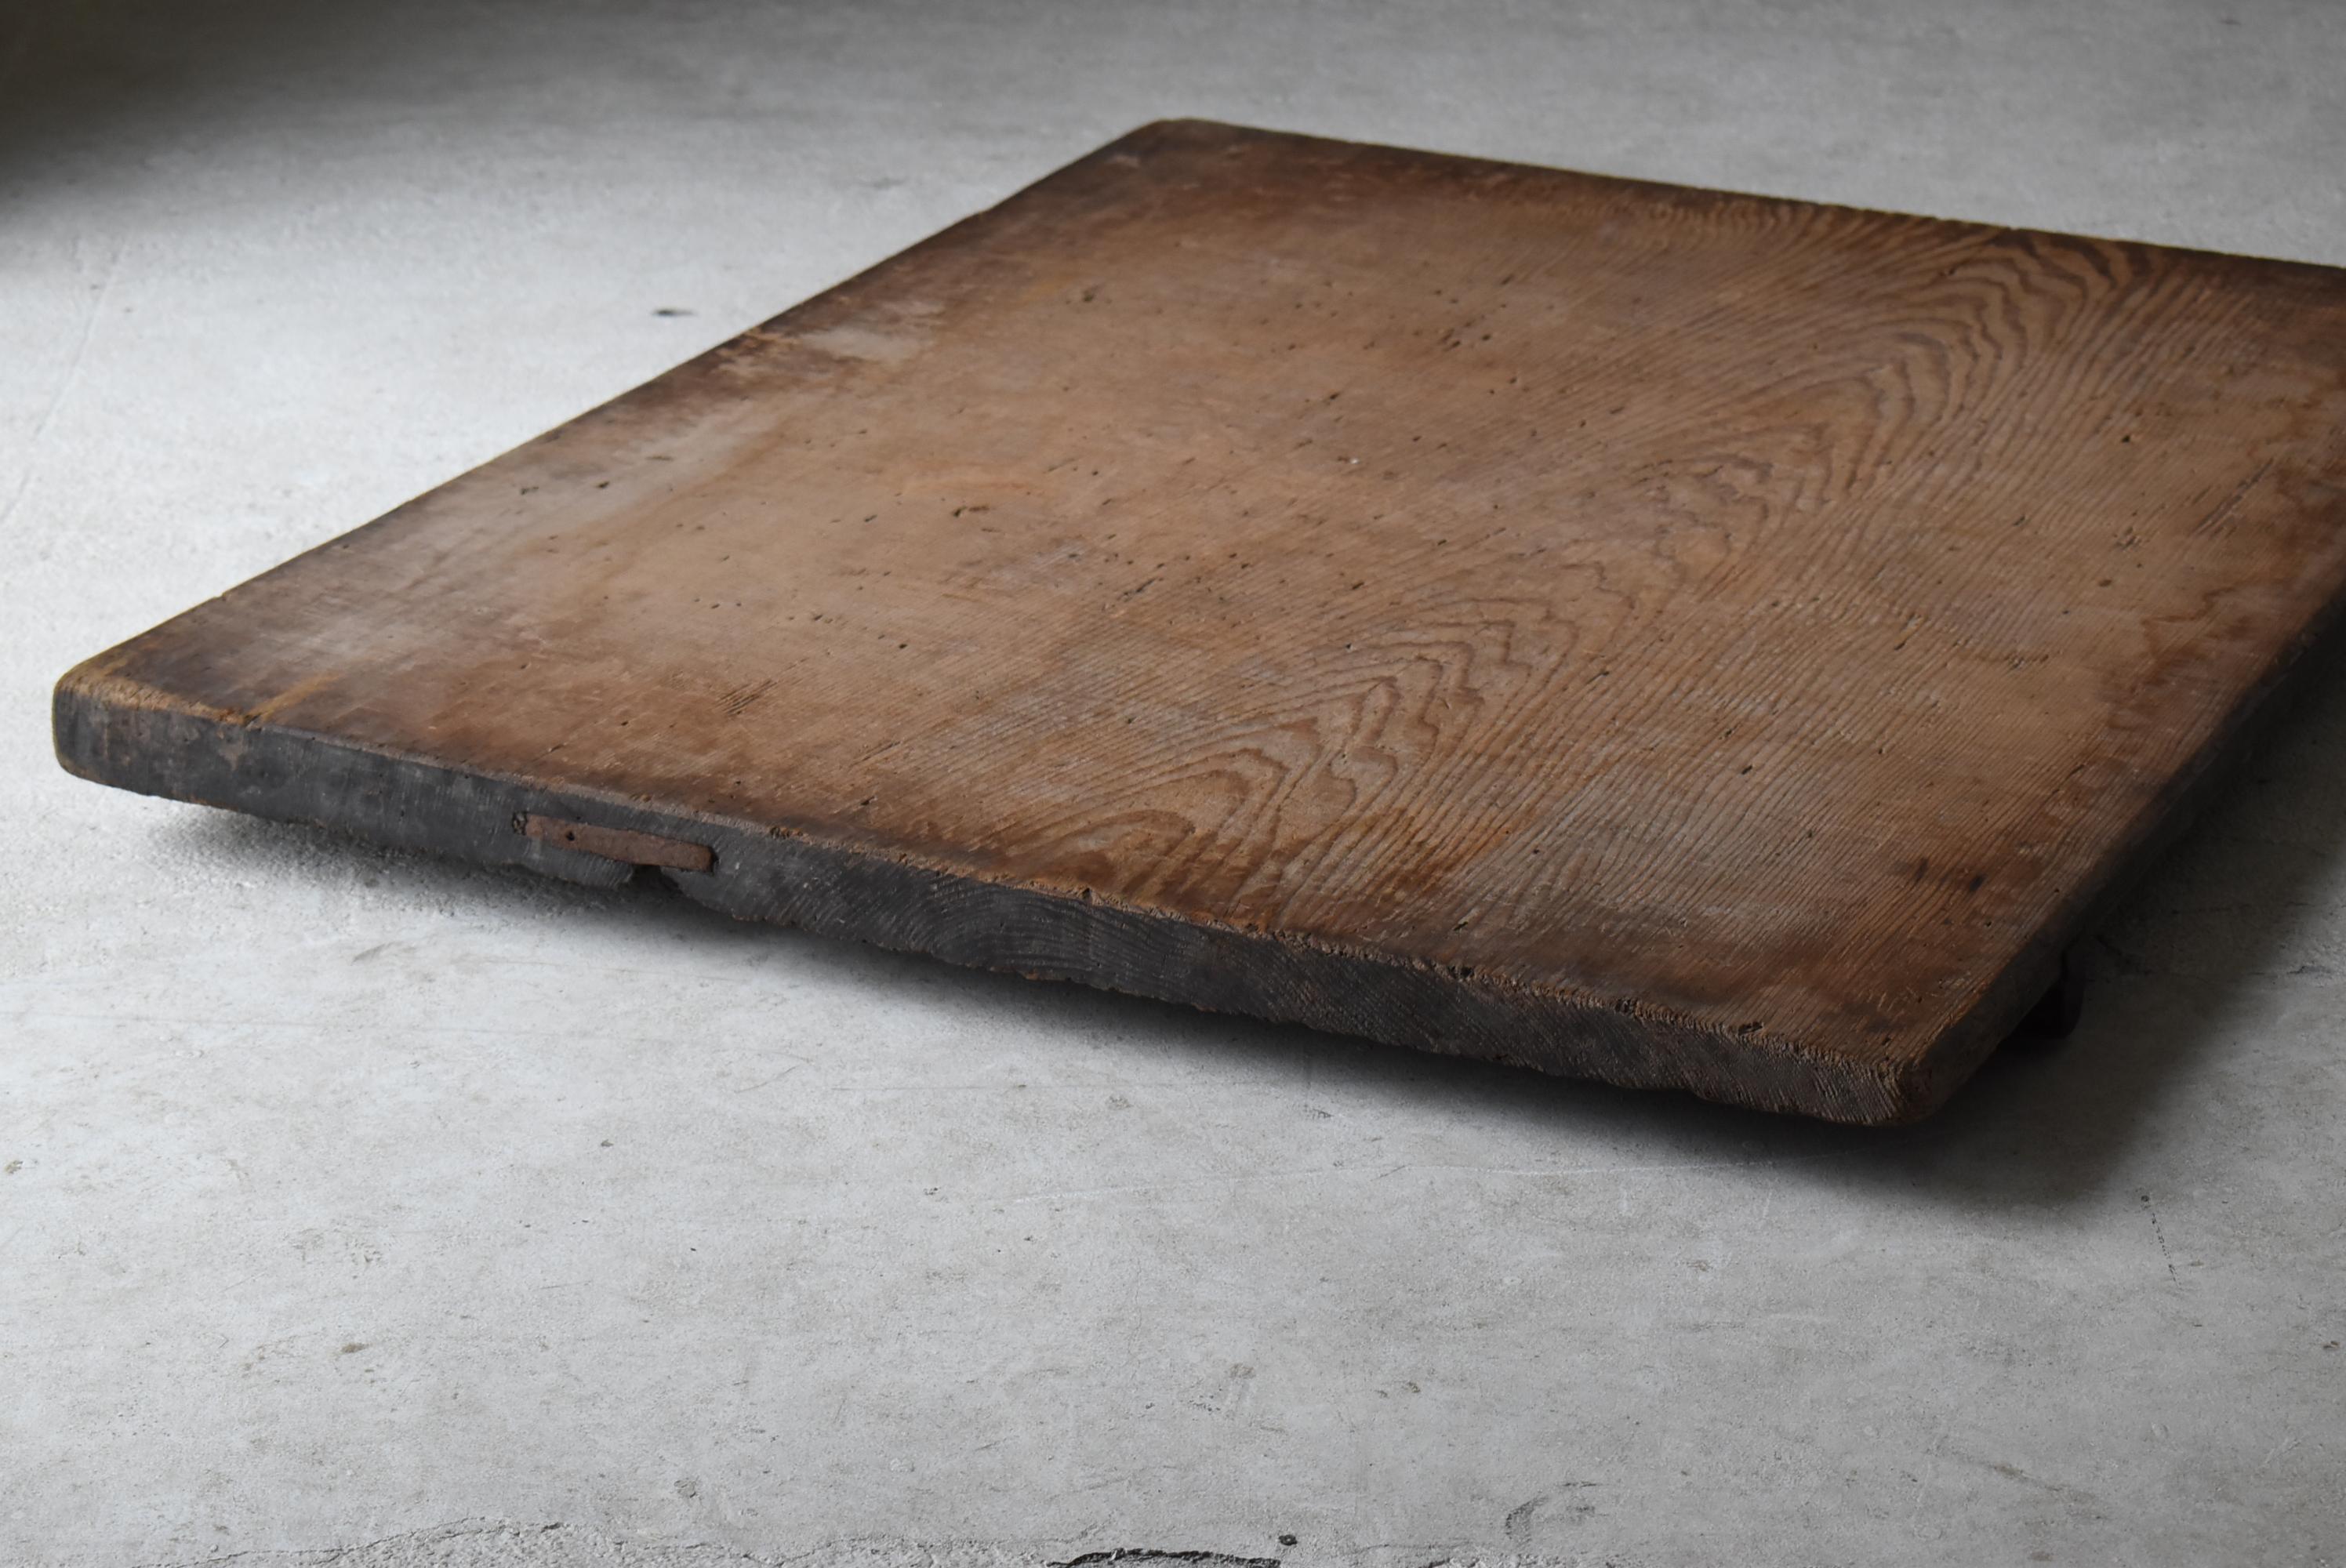 Japanese Antique Extra-Large Wooden board 1860s-1900s / Wabi Sabi Abstract Art 1